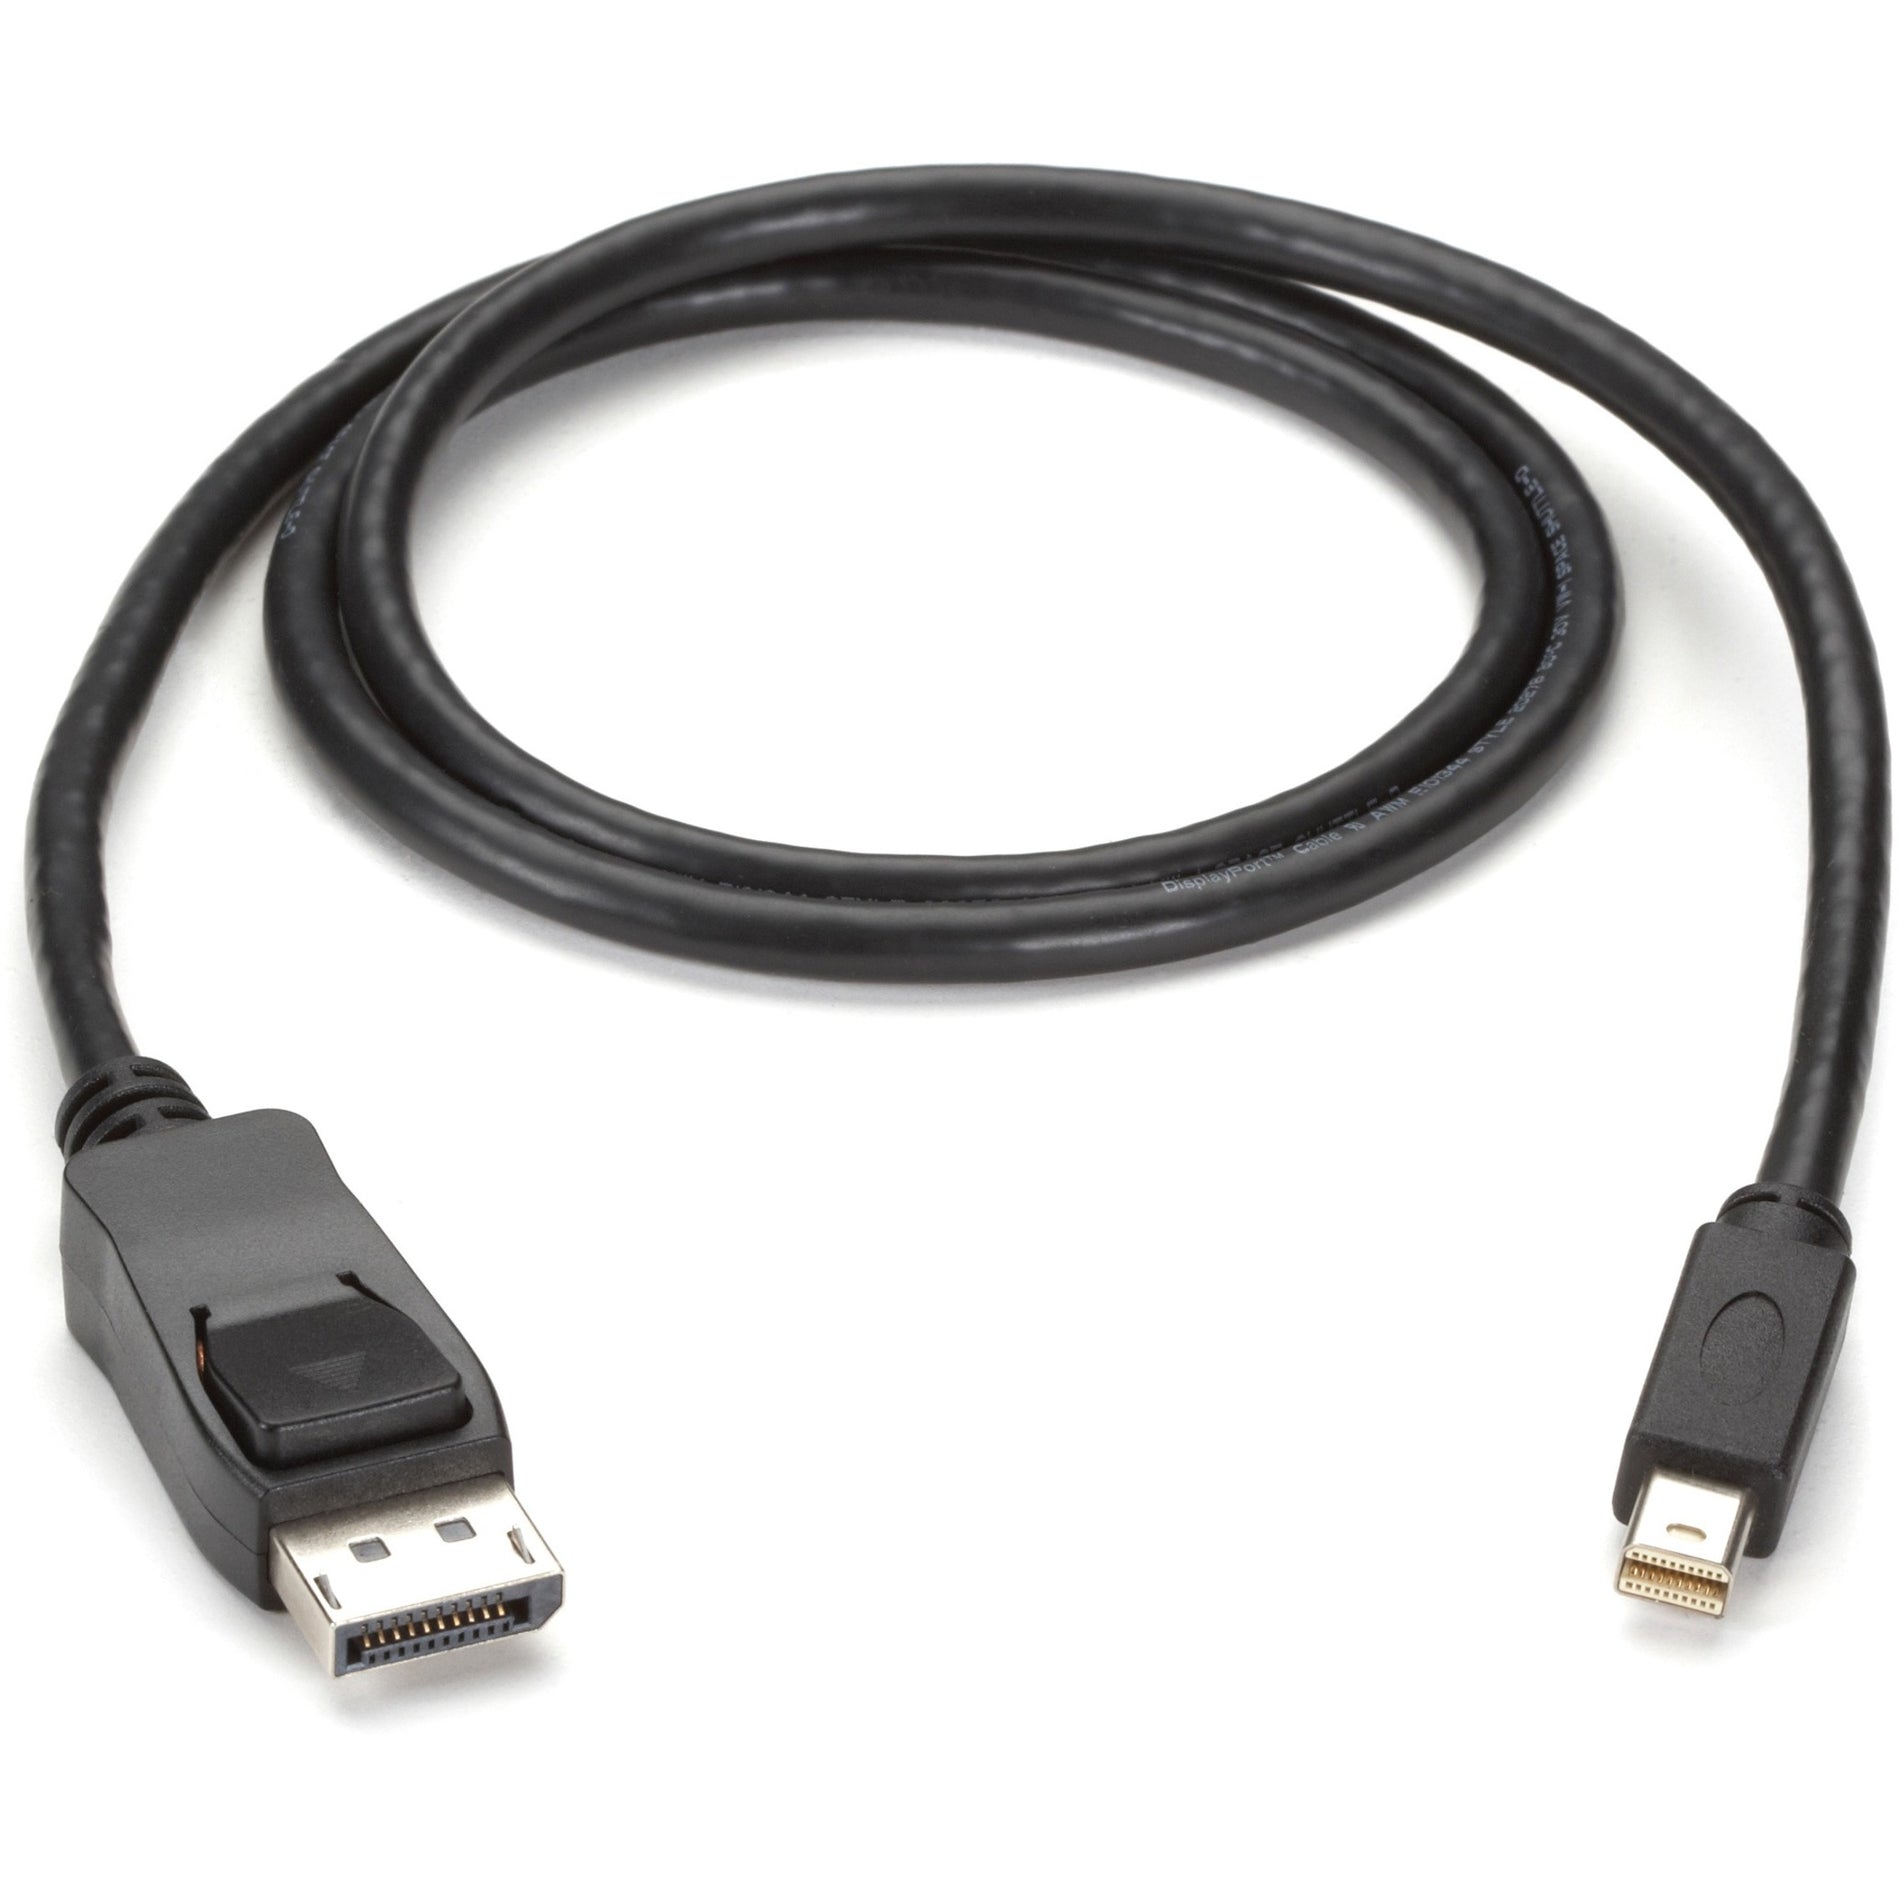 Black Box ENVMDPDP-0006-MM Mini DisplayPort to DisplayPort Cable, 6 ft, Gold-Plated Connectors, 5.4 Gbit/s Data Transfer Rate